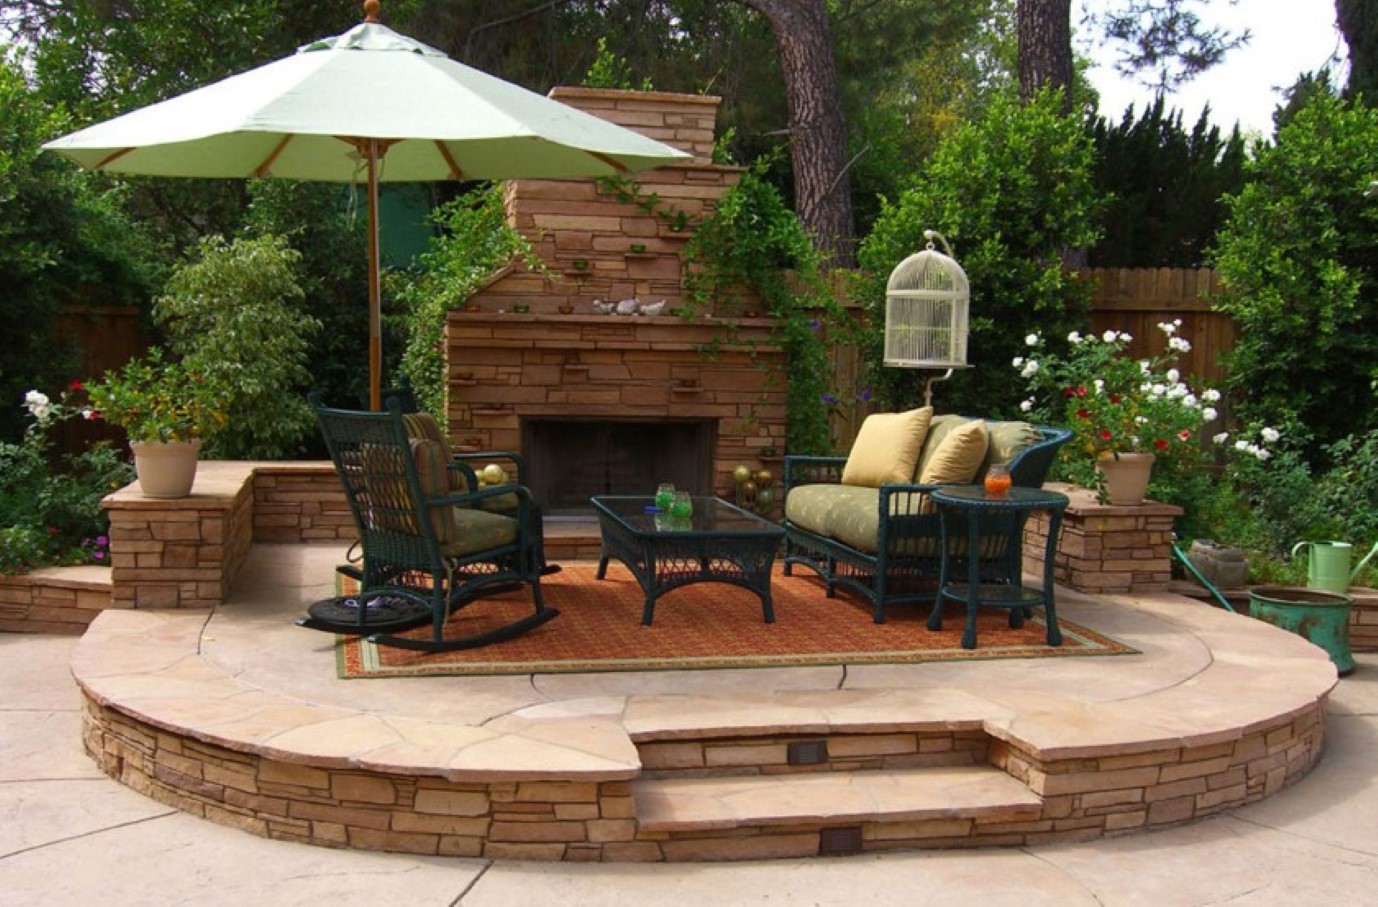 Brick Outdoor Brown Chic Brick Outdoor Fireplace Feat Brown Area Rug And Wicker Rocking Chair Plus Green Umbrella In Stunning Backyard Patio Idea Backyard  Decorating Backyard Patio Ideas For Lovely Family And Enhancing Your House Design 